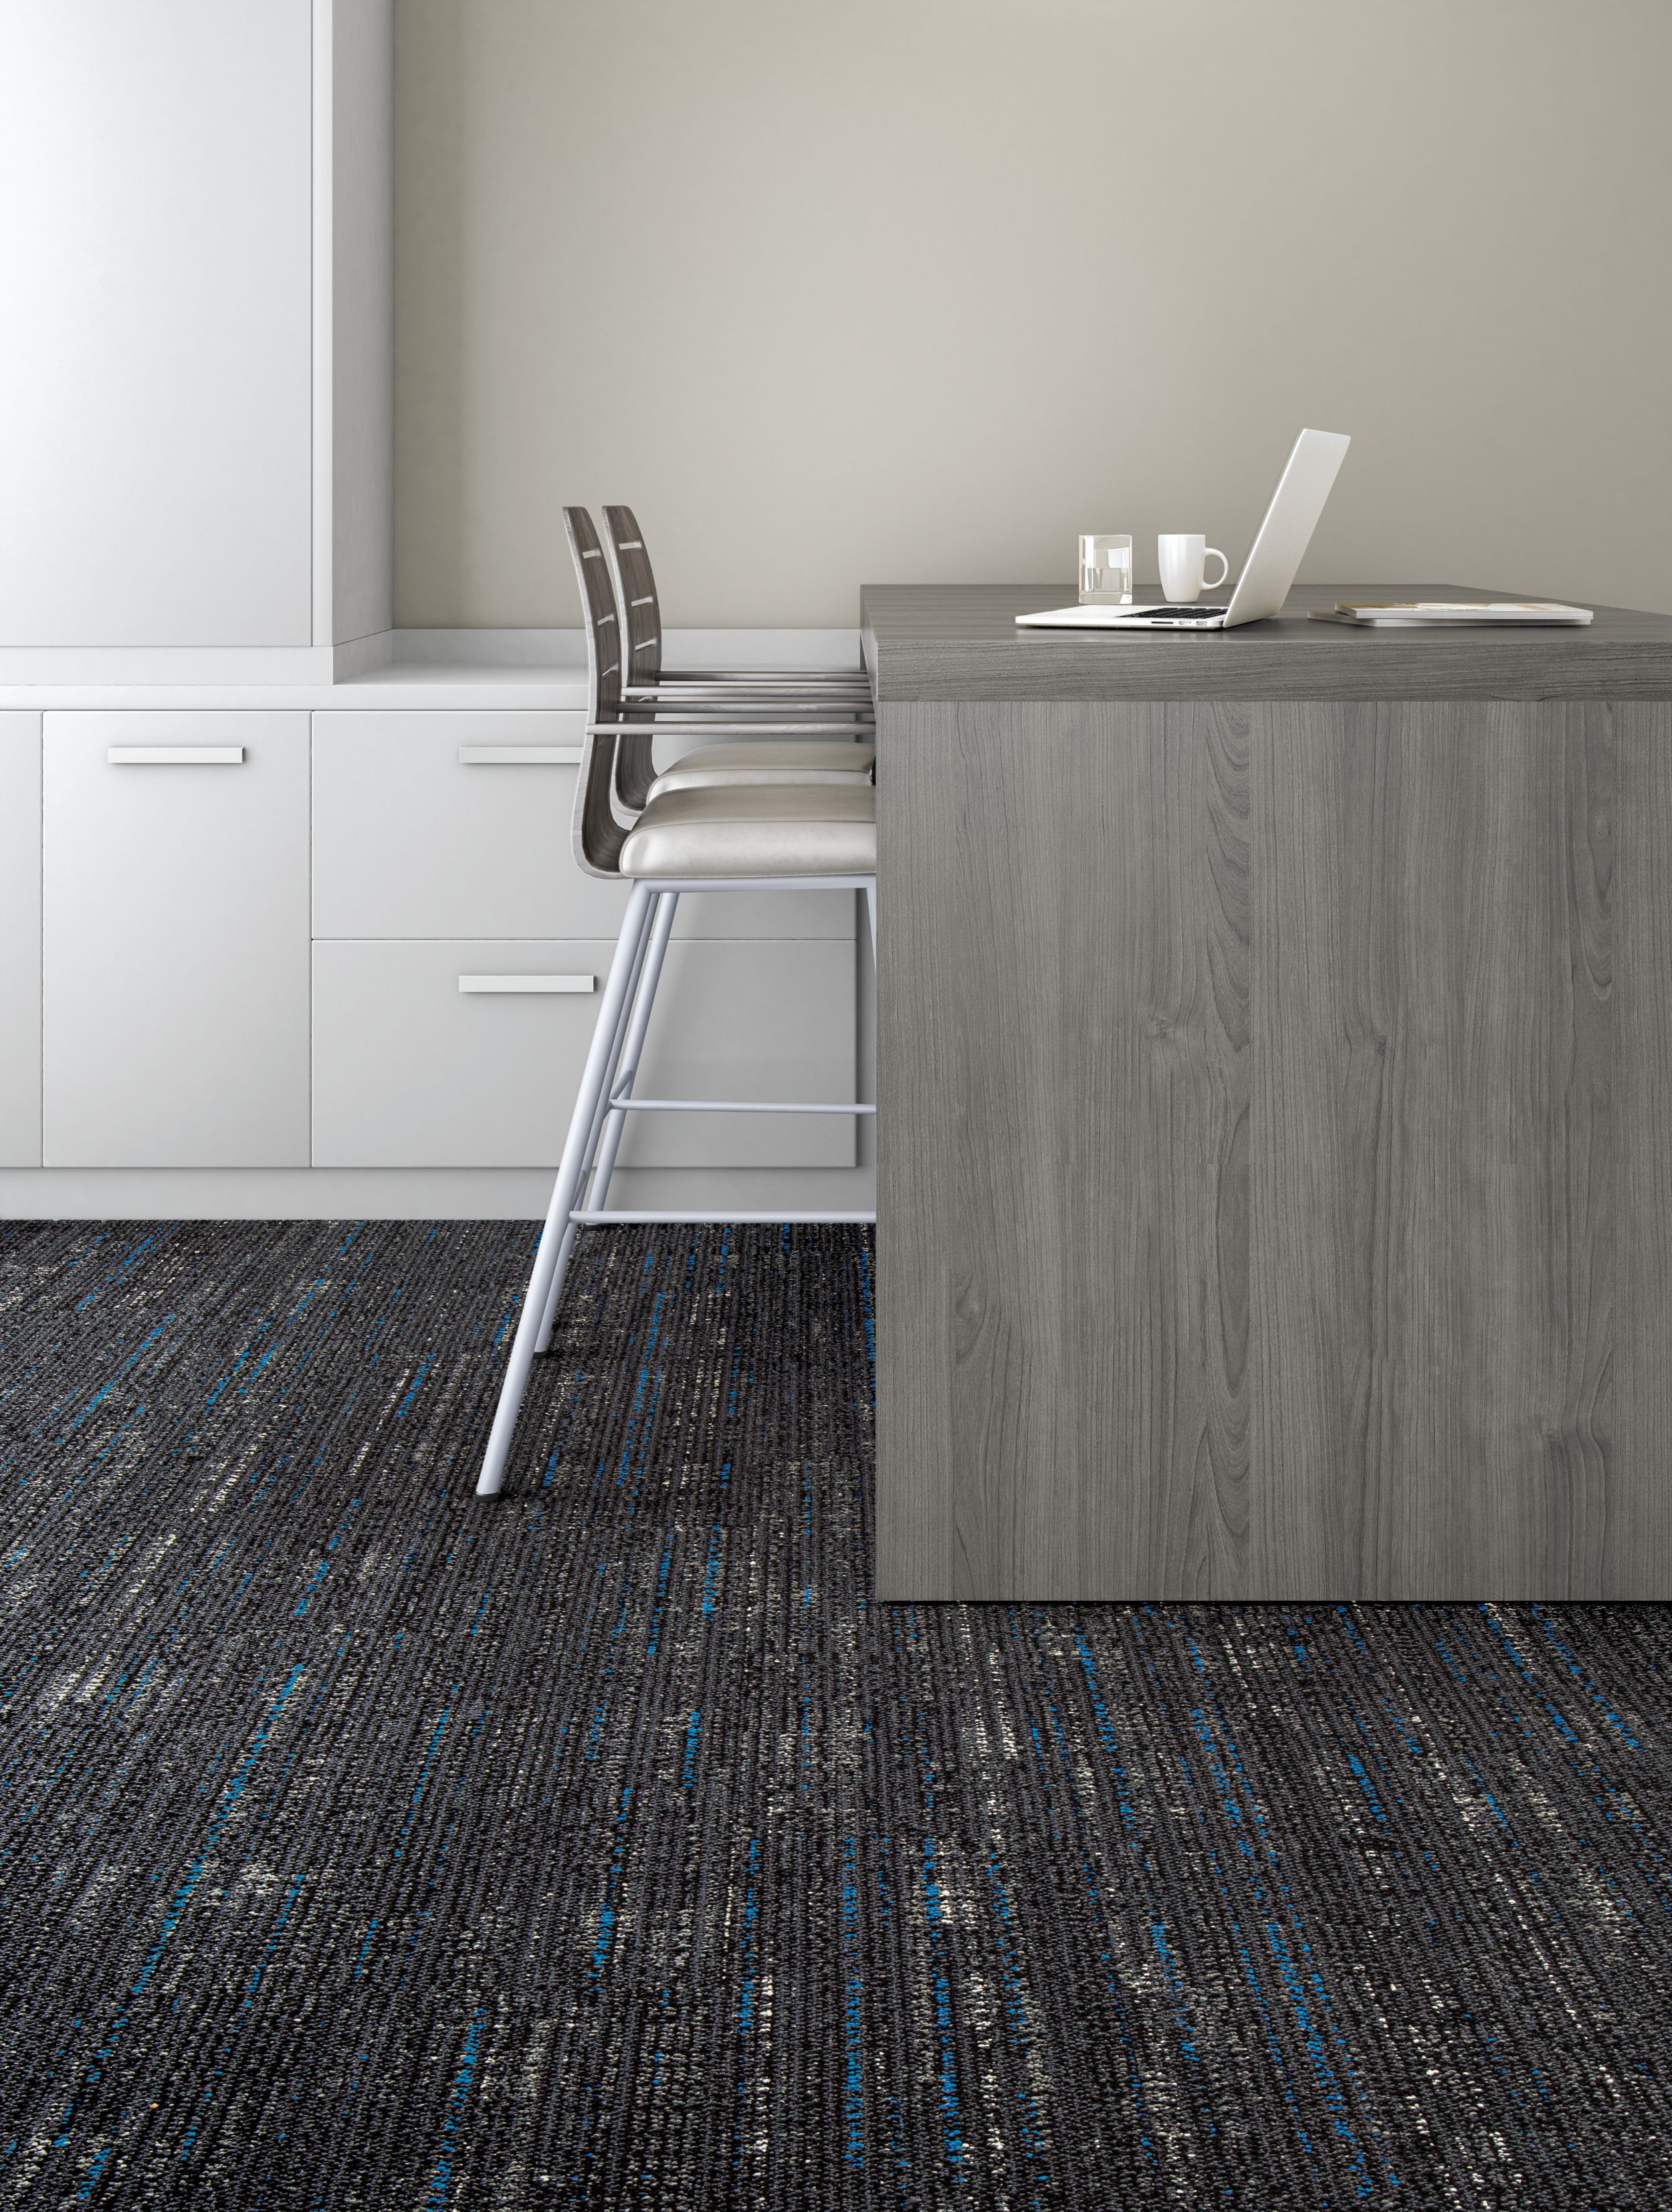 Interface Bitrate plank carpet tile in office area with desk and chair numéro d’image 5